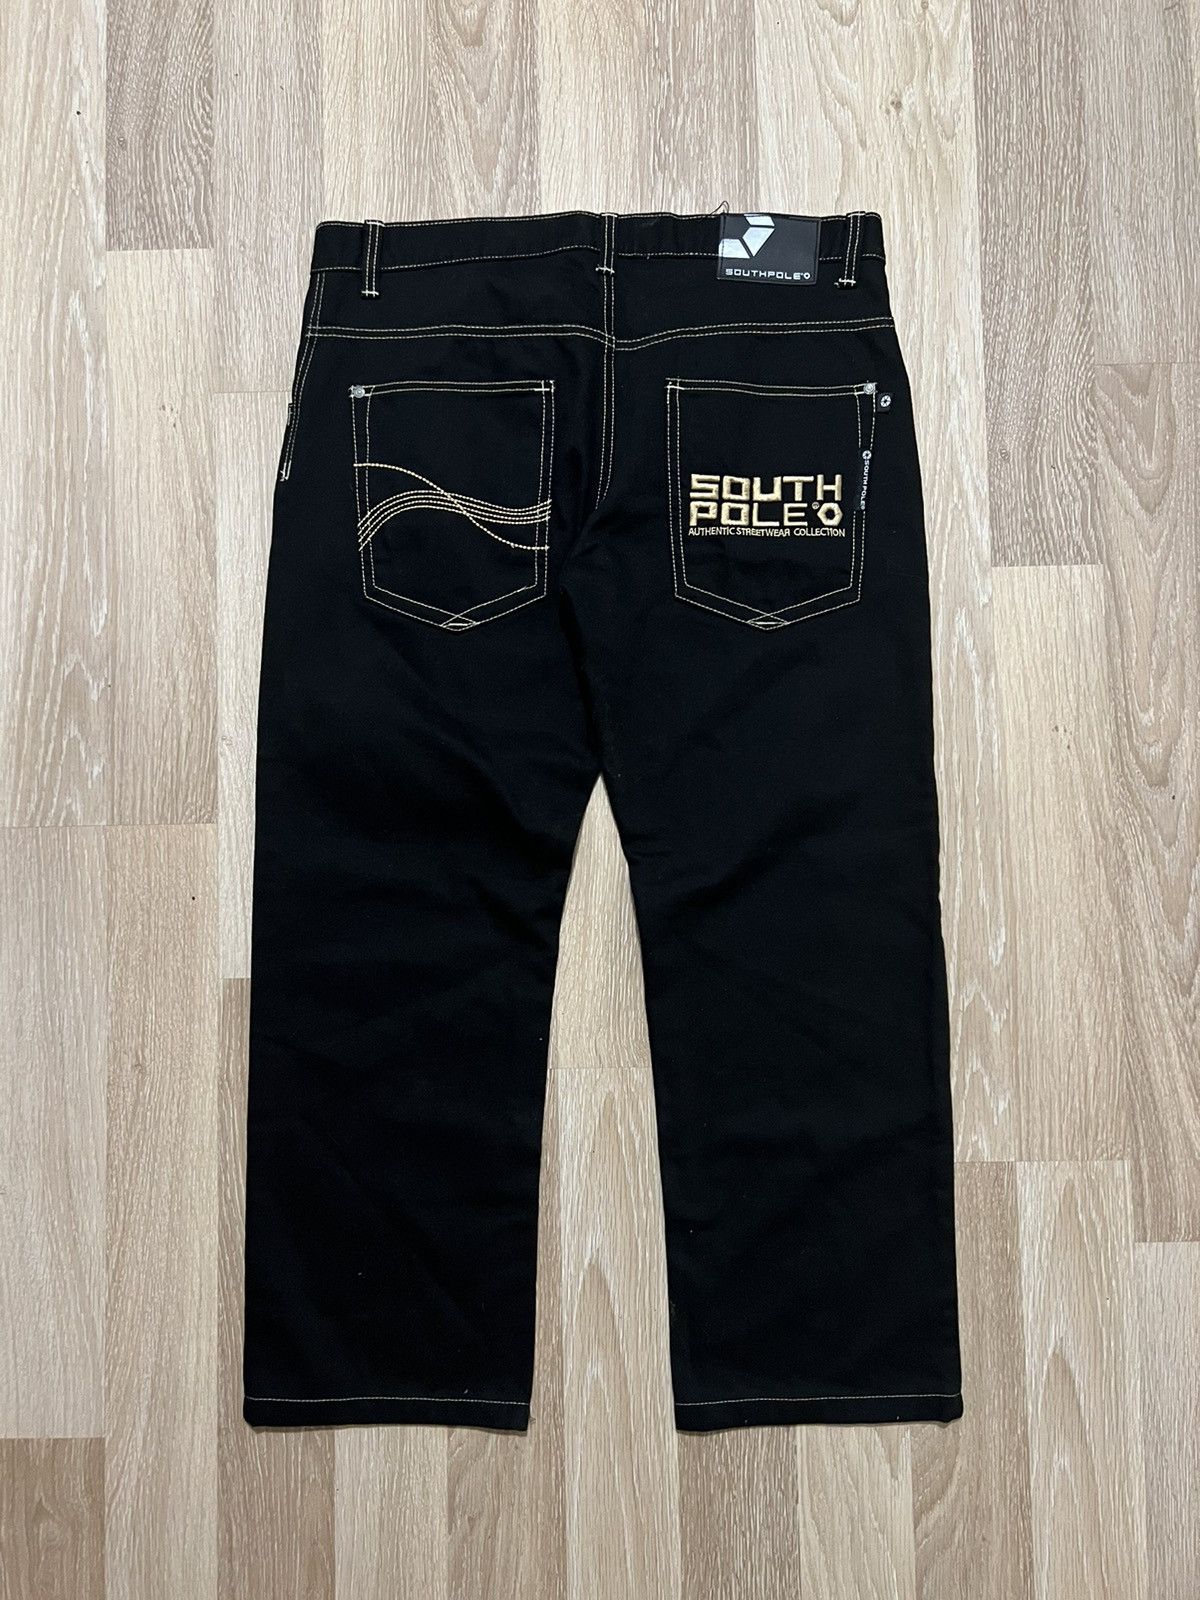 Pre-owned Jnco X Southpole Jeans In Black